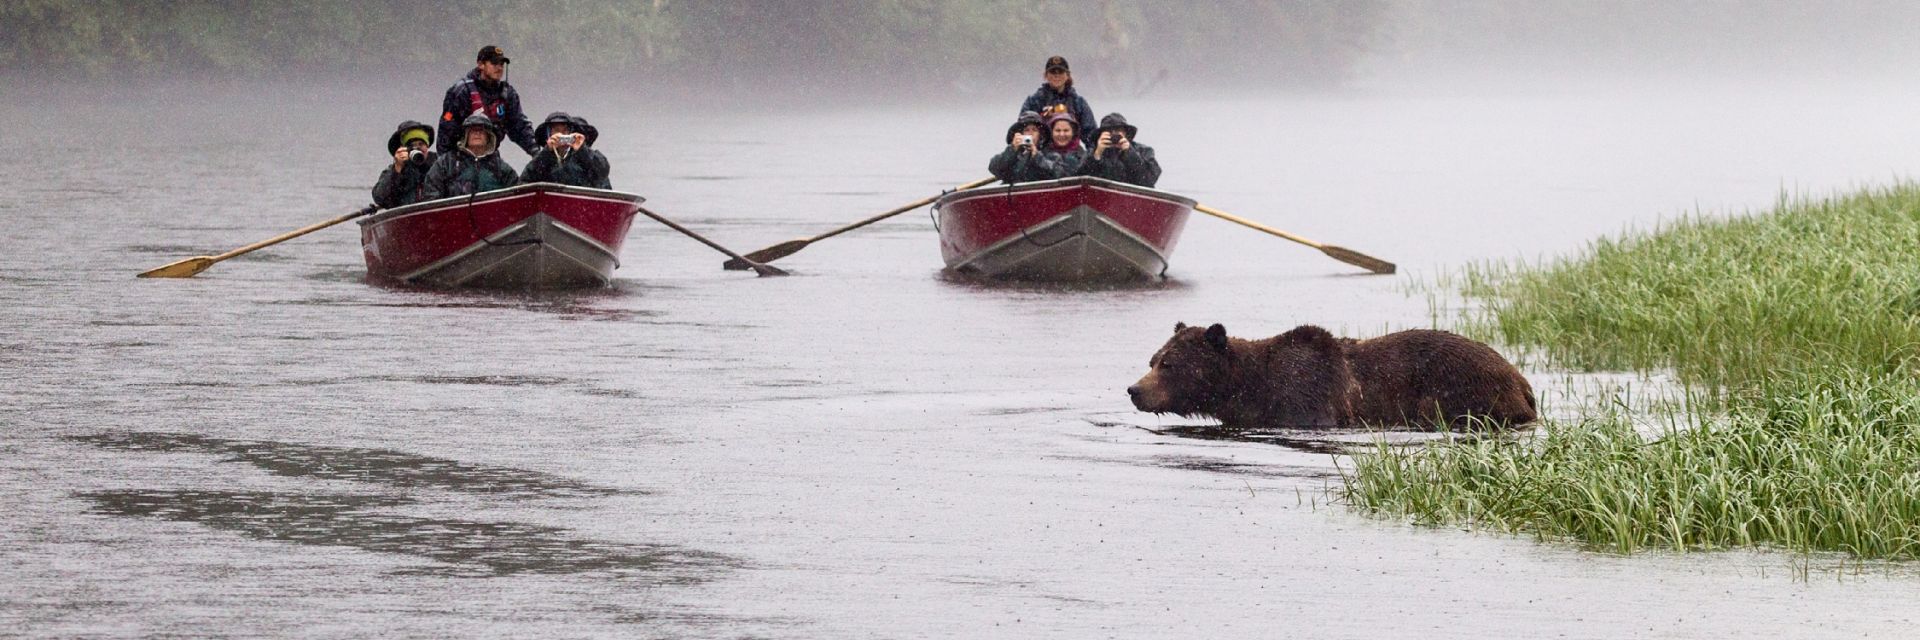 A wildlife tour in boats watching a grizzly bear cross a stream